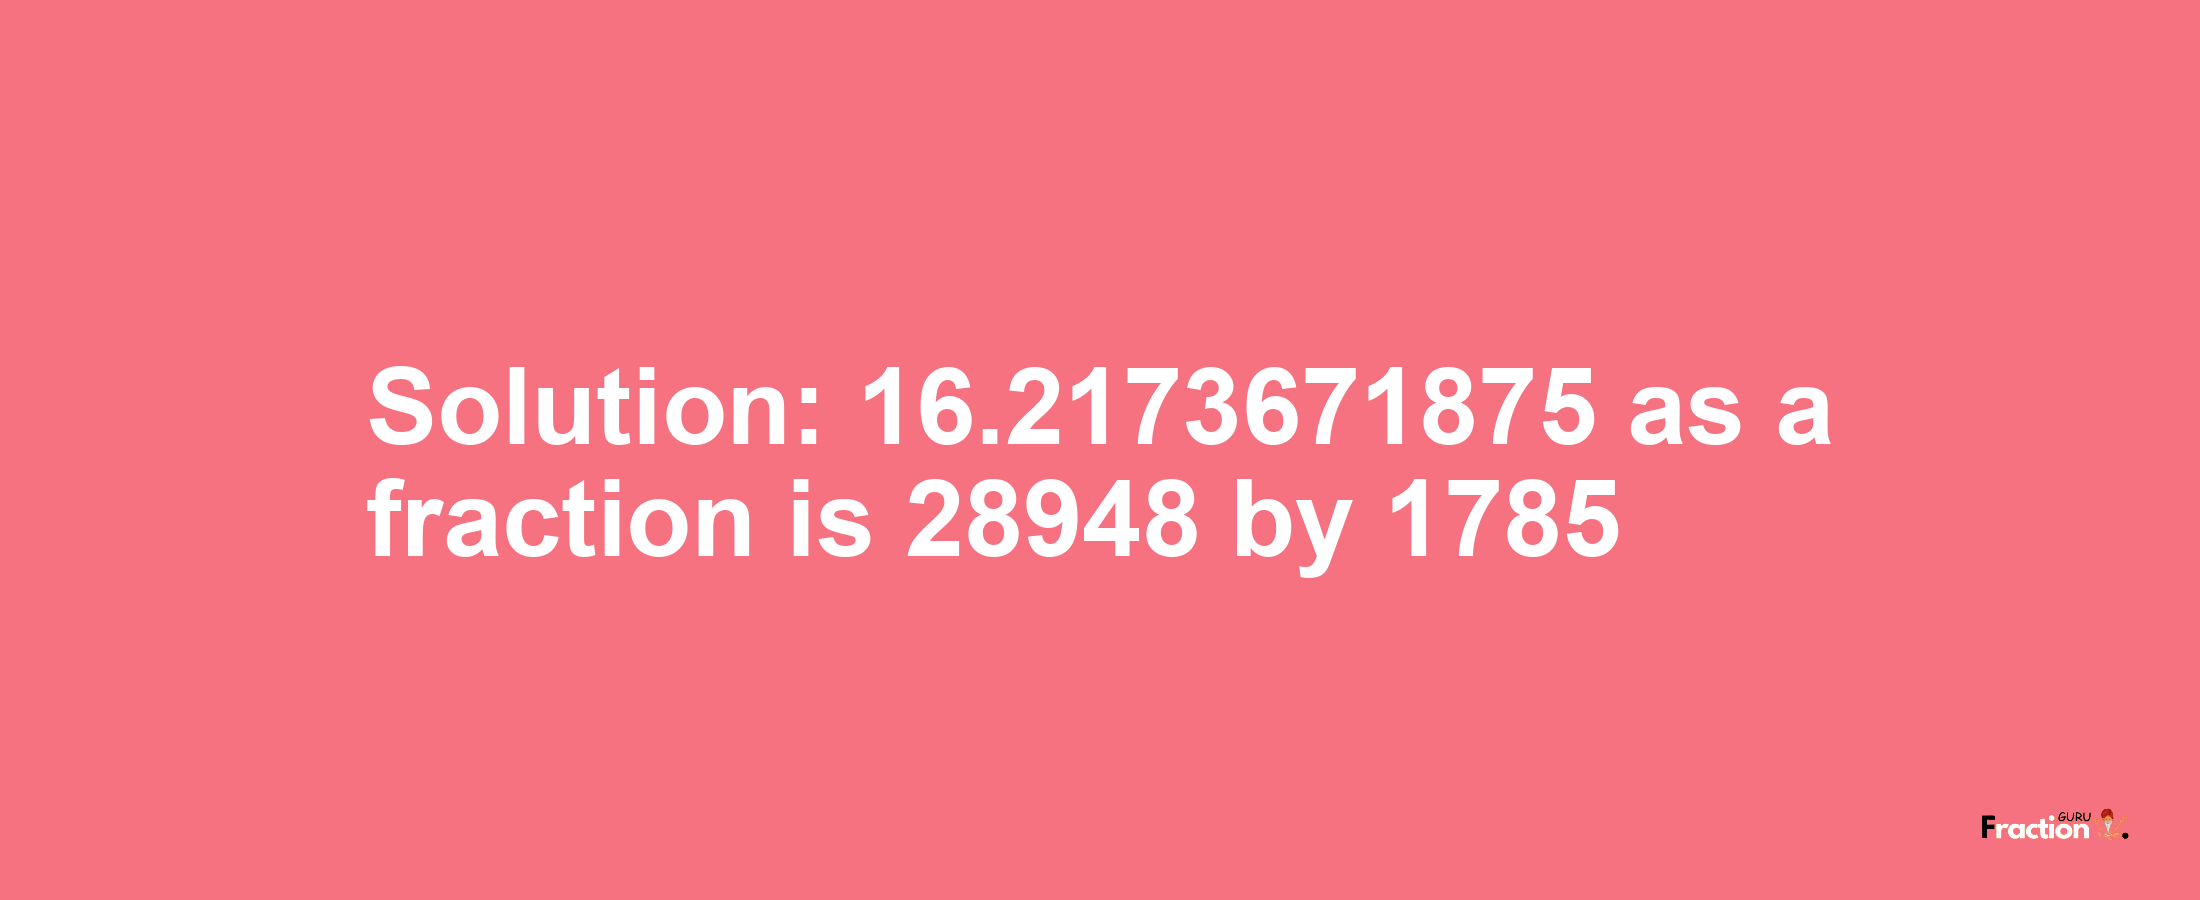 Solution:16.2173671875 as a fraction is 28948/1785